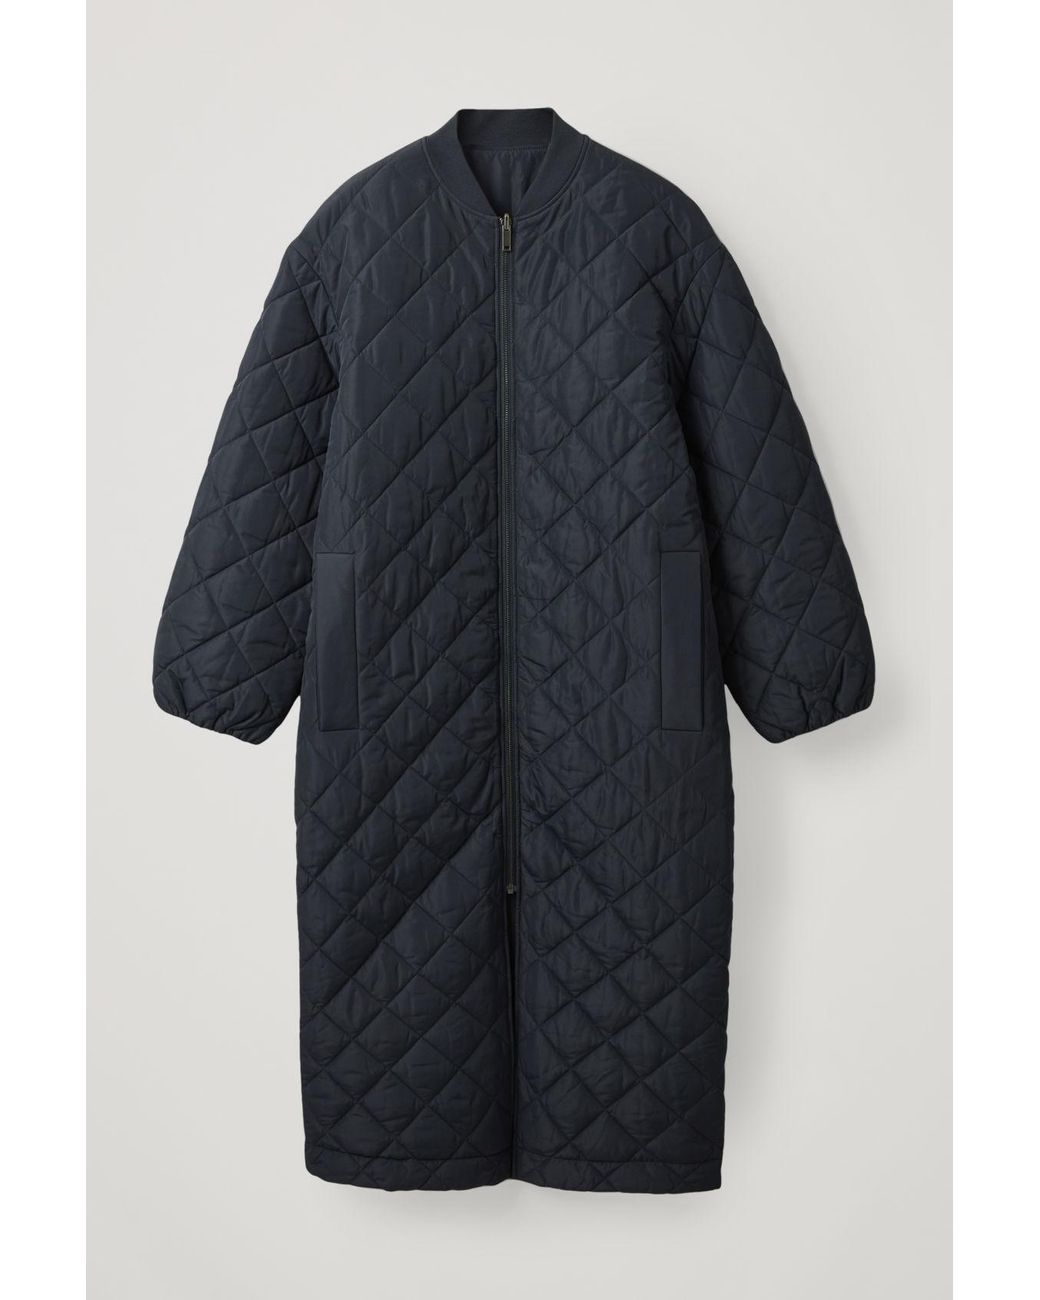 COS Synthetic Longline Quilted Coat in Blue - Lyst